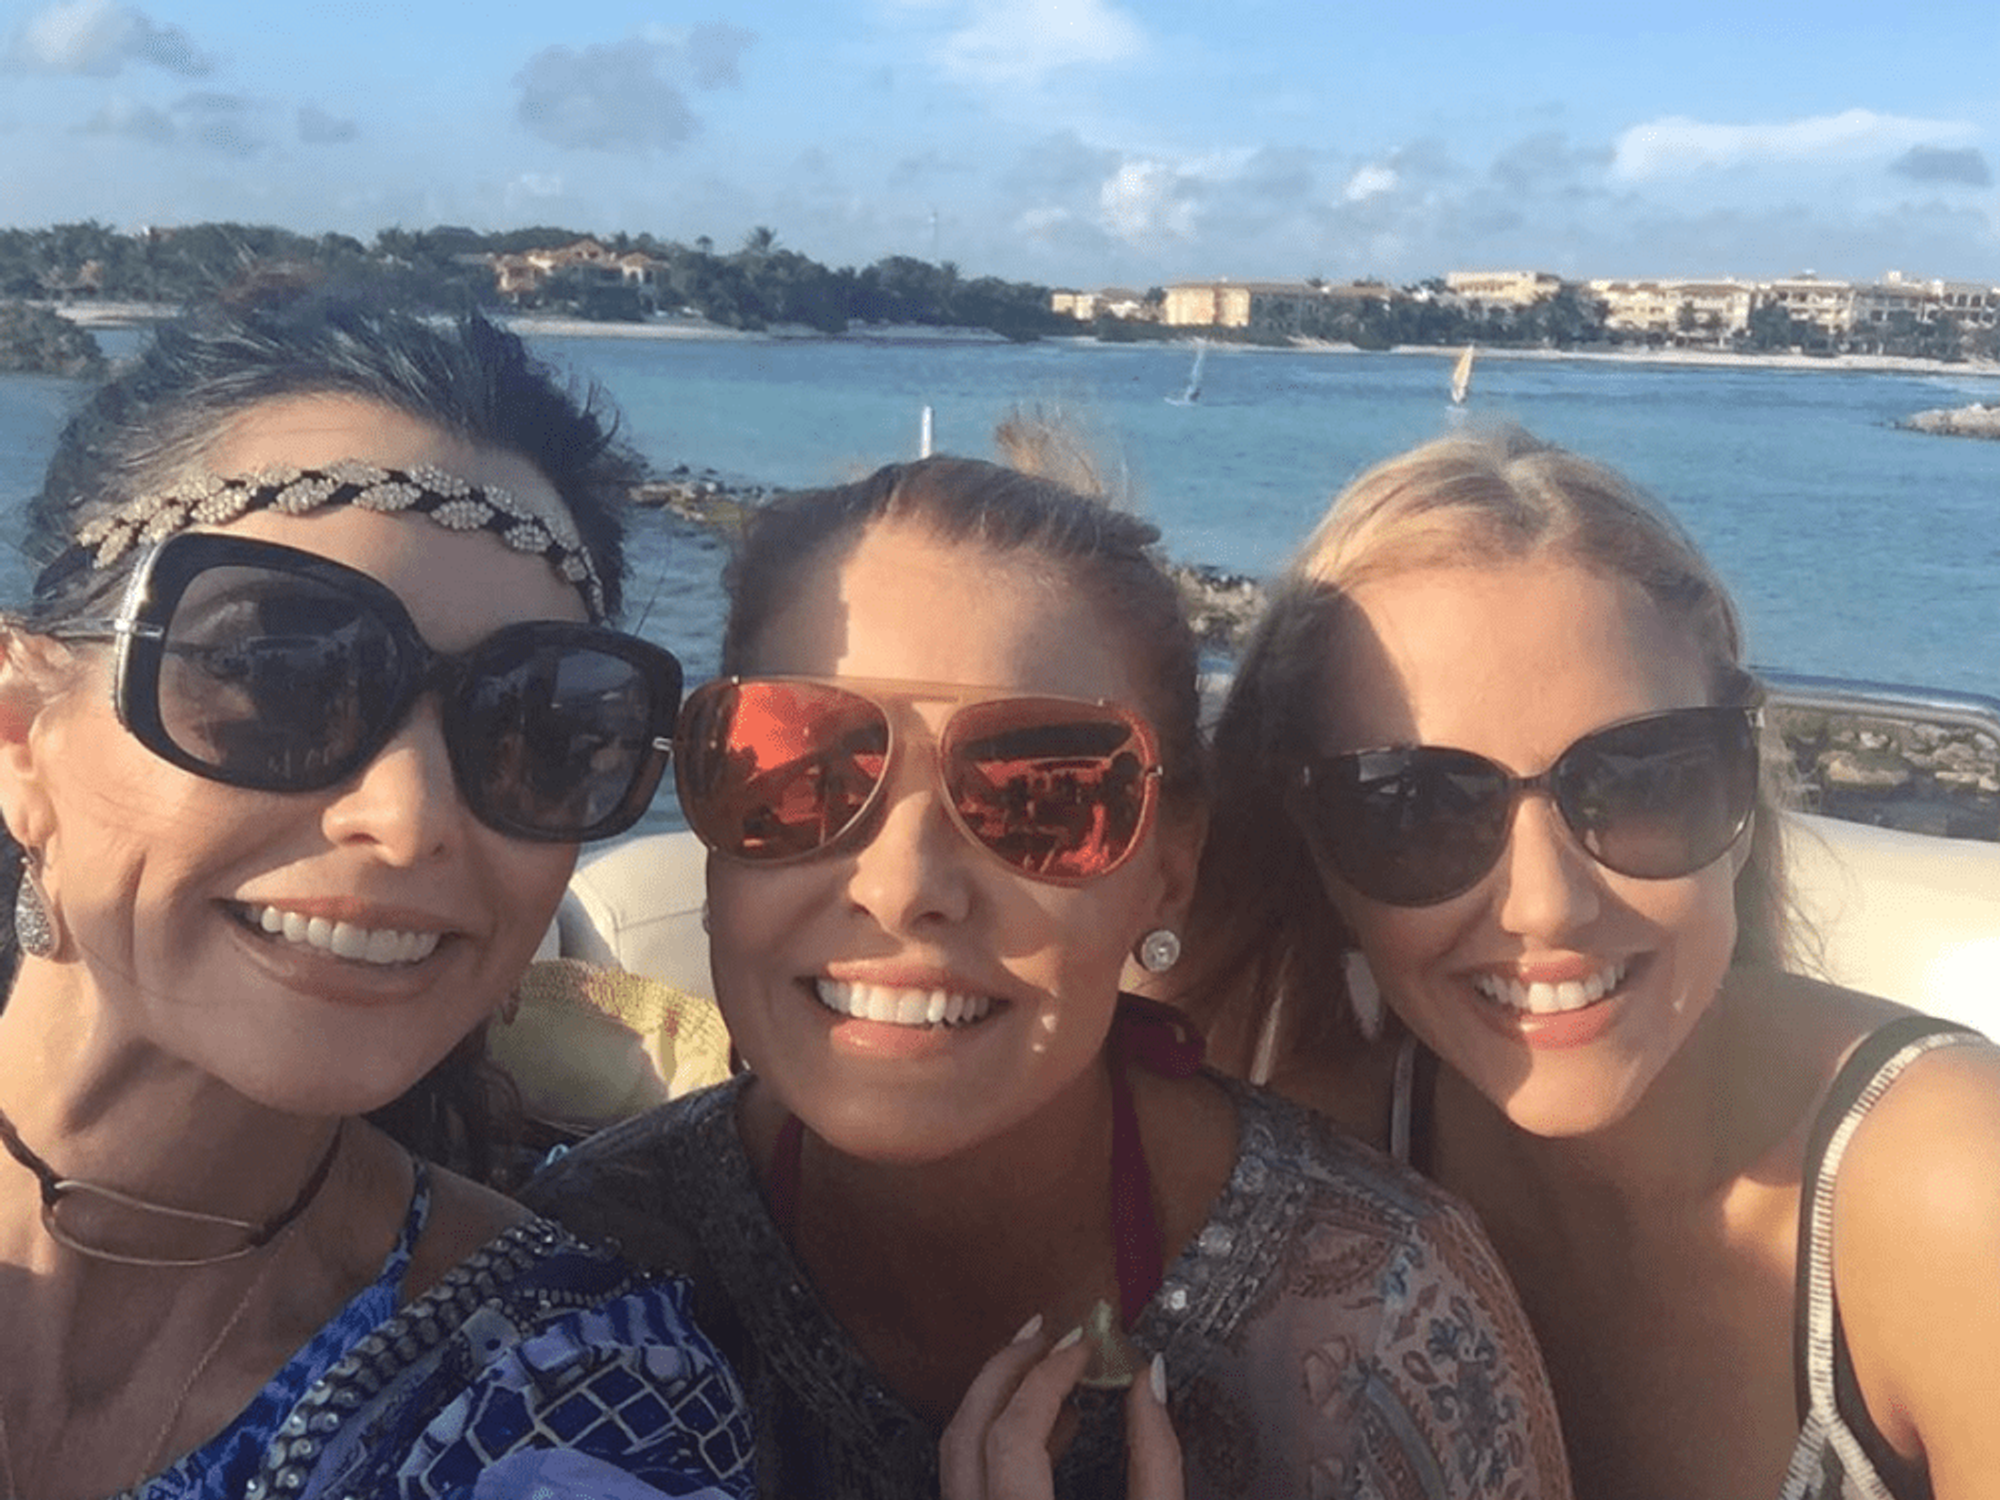 D'Andra, Brandi, and Stephanie in Mexico, Real Housewives